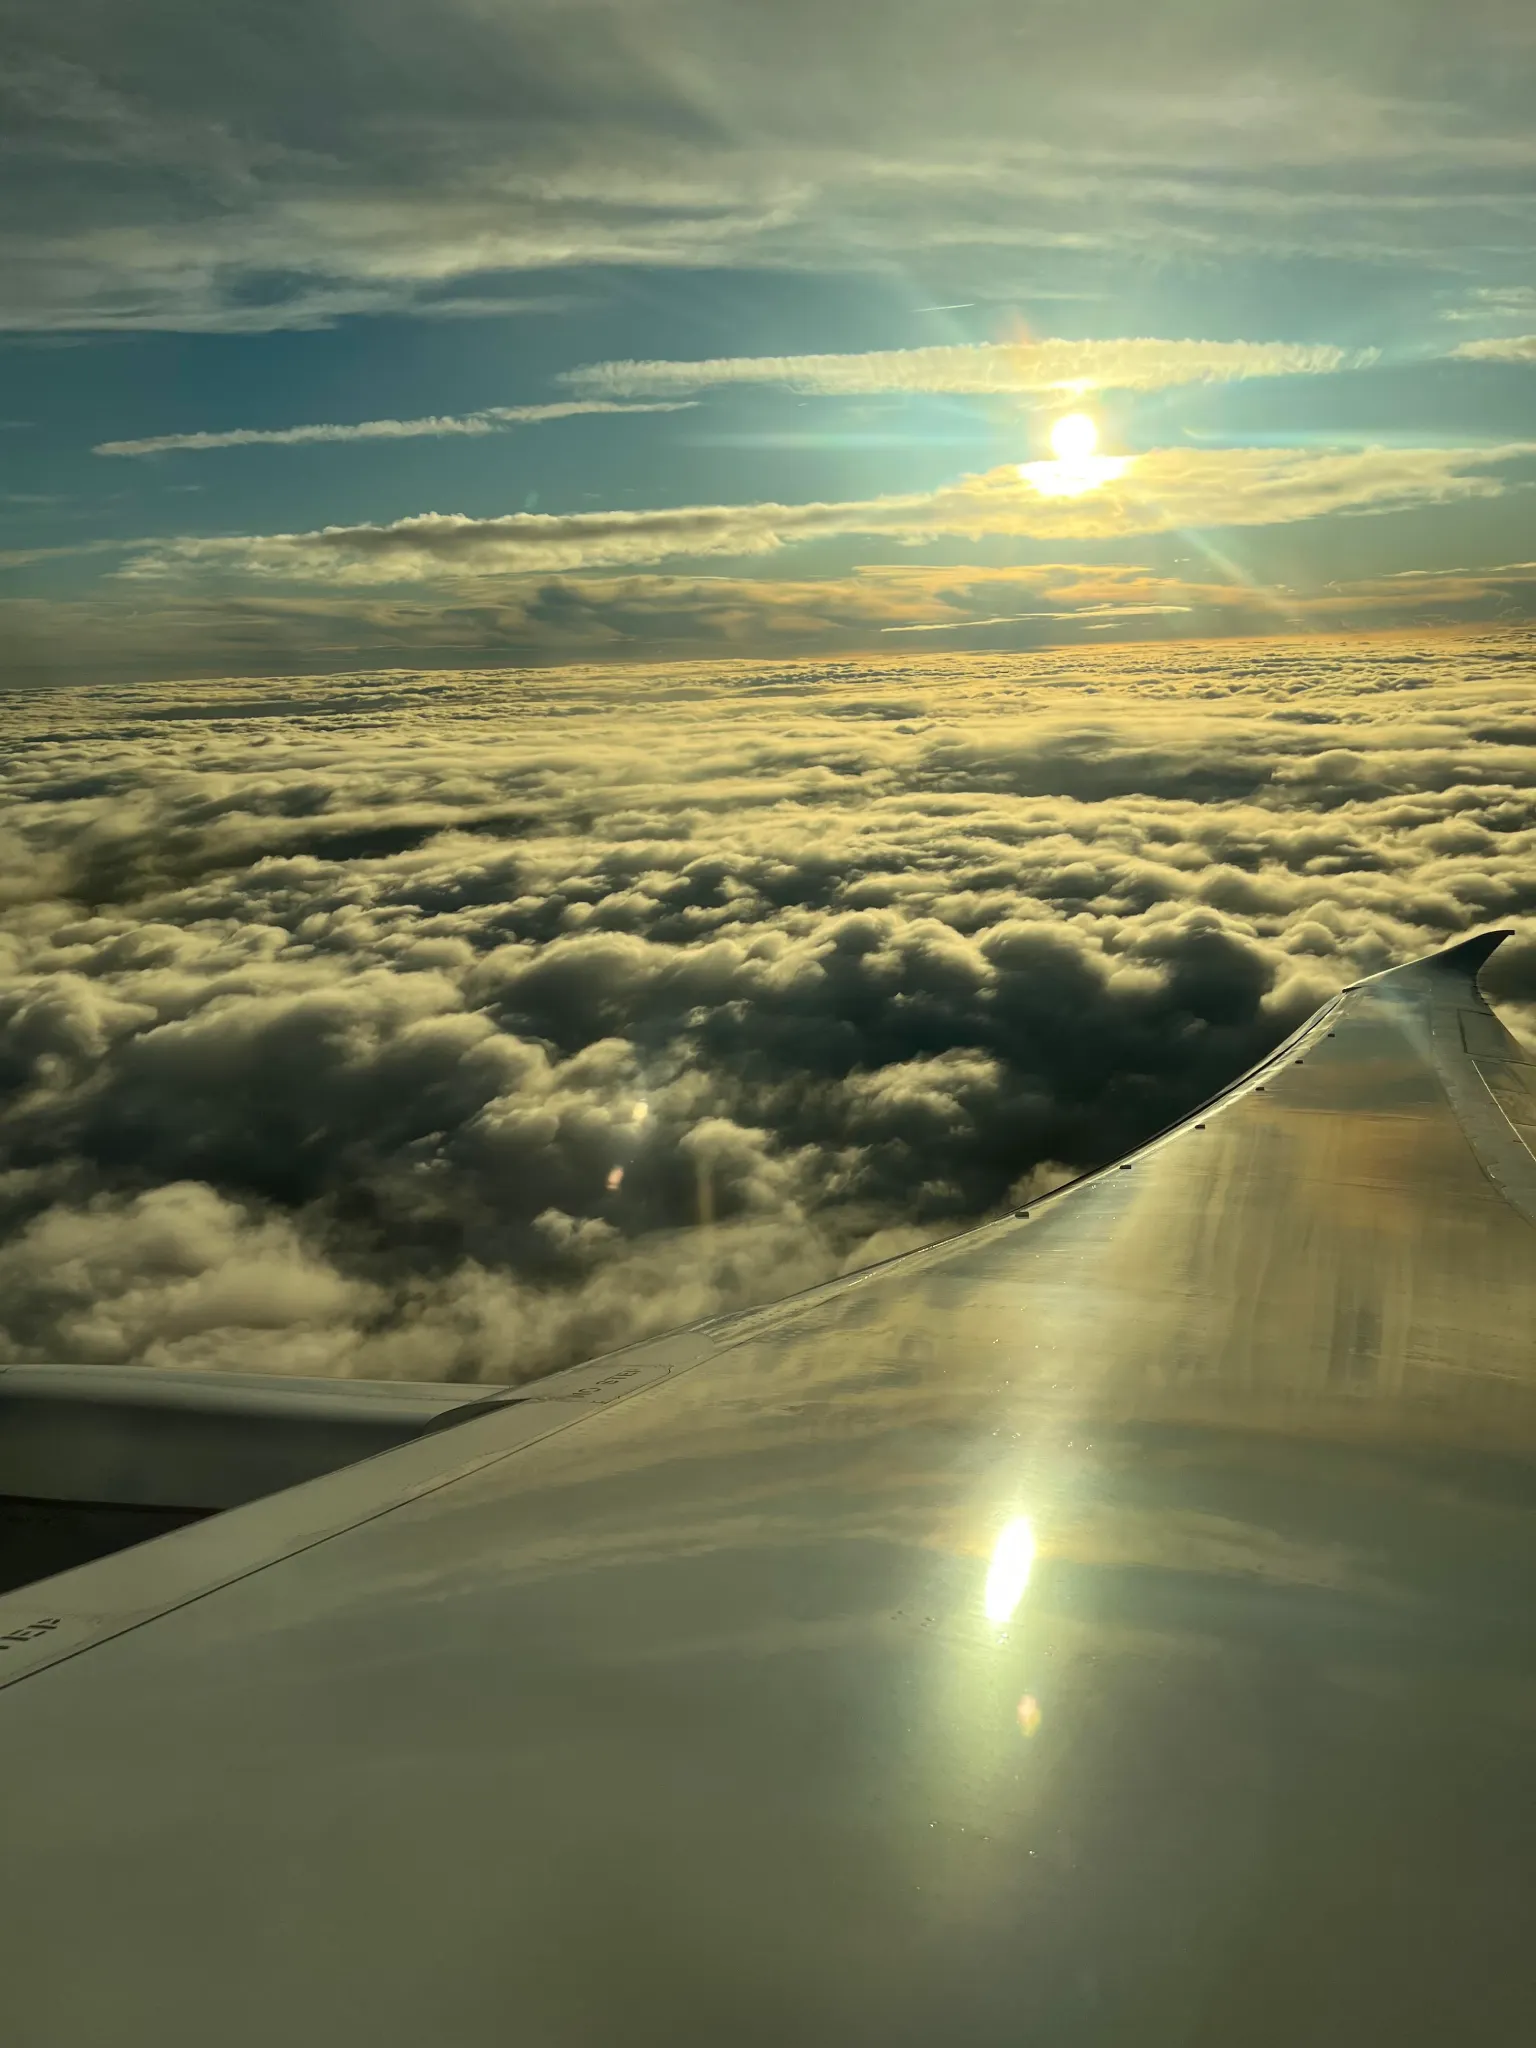 A photo out the window of a plane.